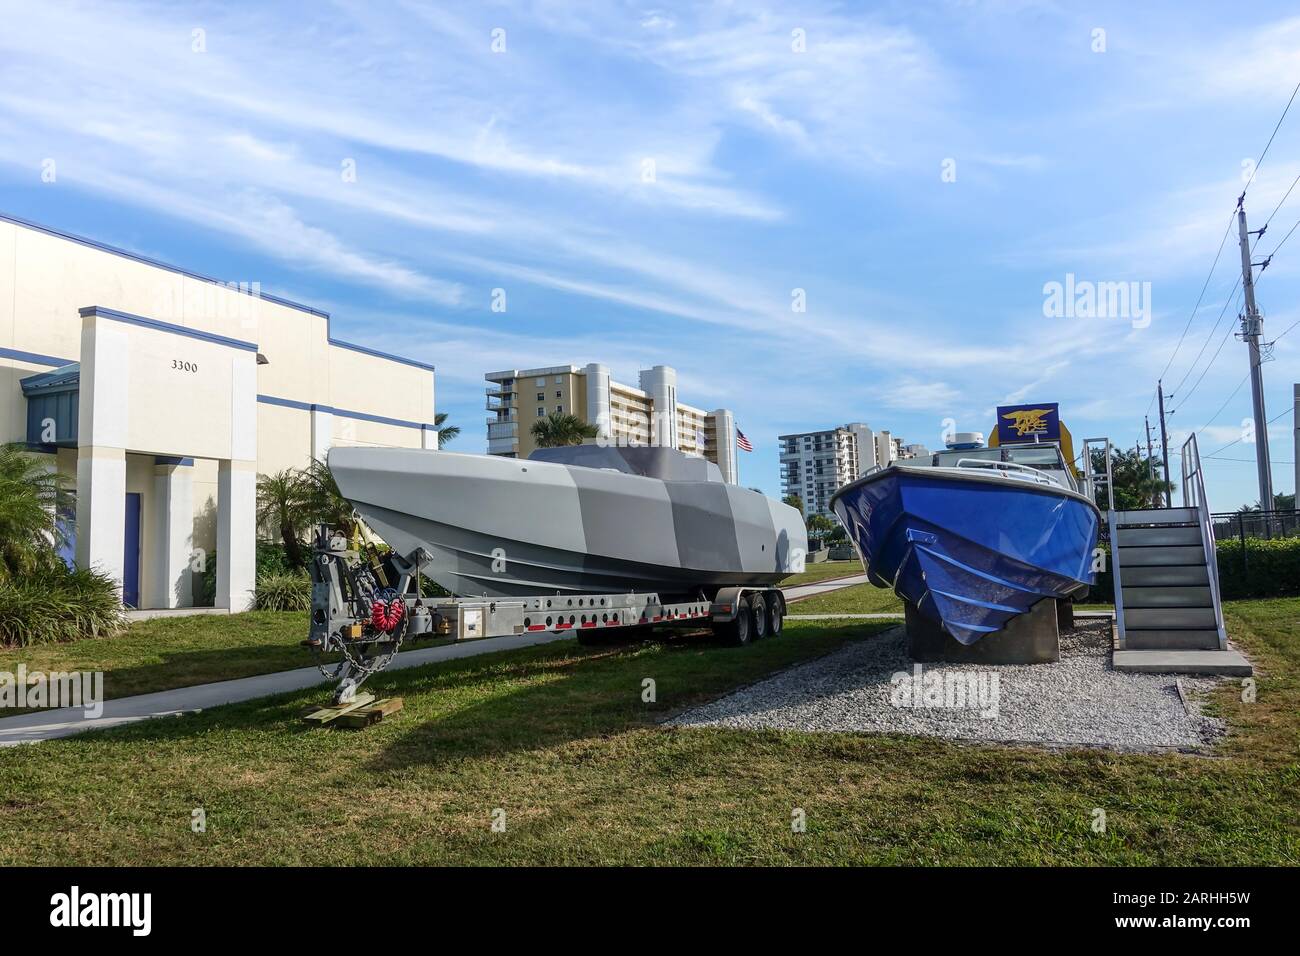 Ft. Pierce,FL/USA-1/27/20: Boats used by the Navy SEALs in the line of duty. Stock Photo